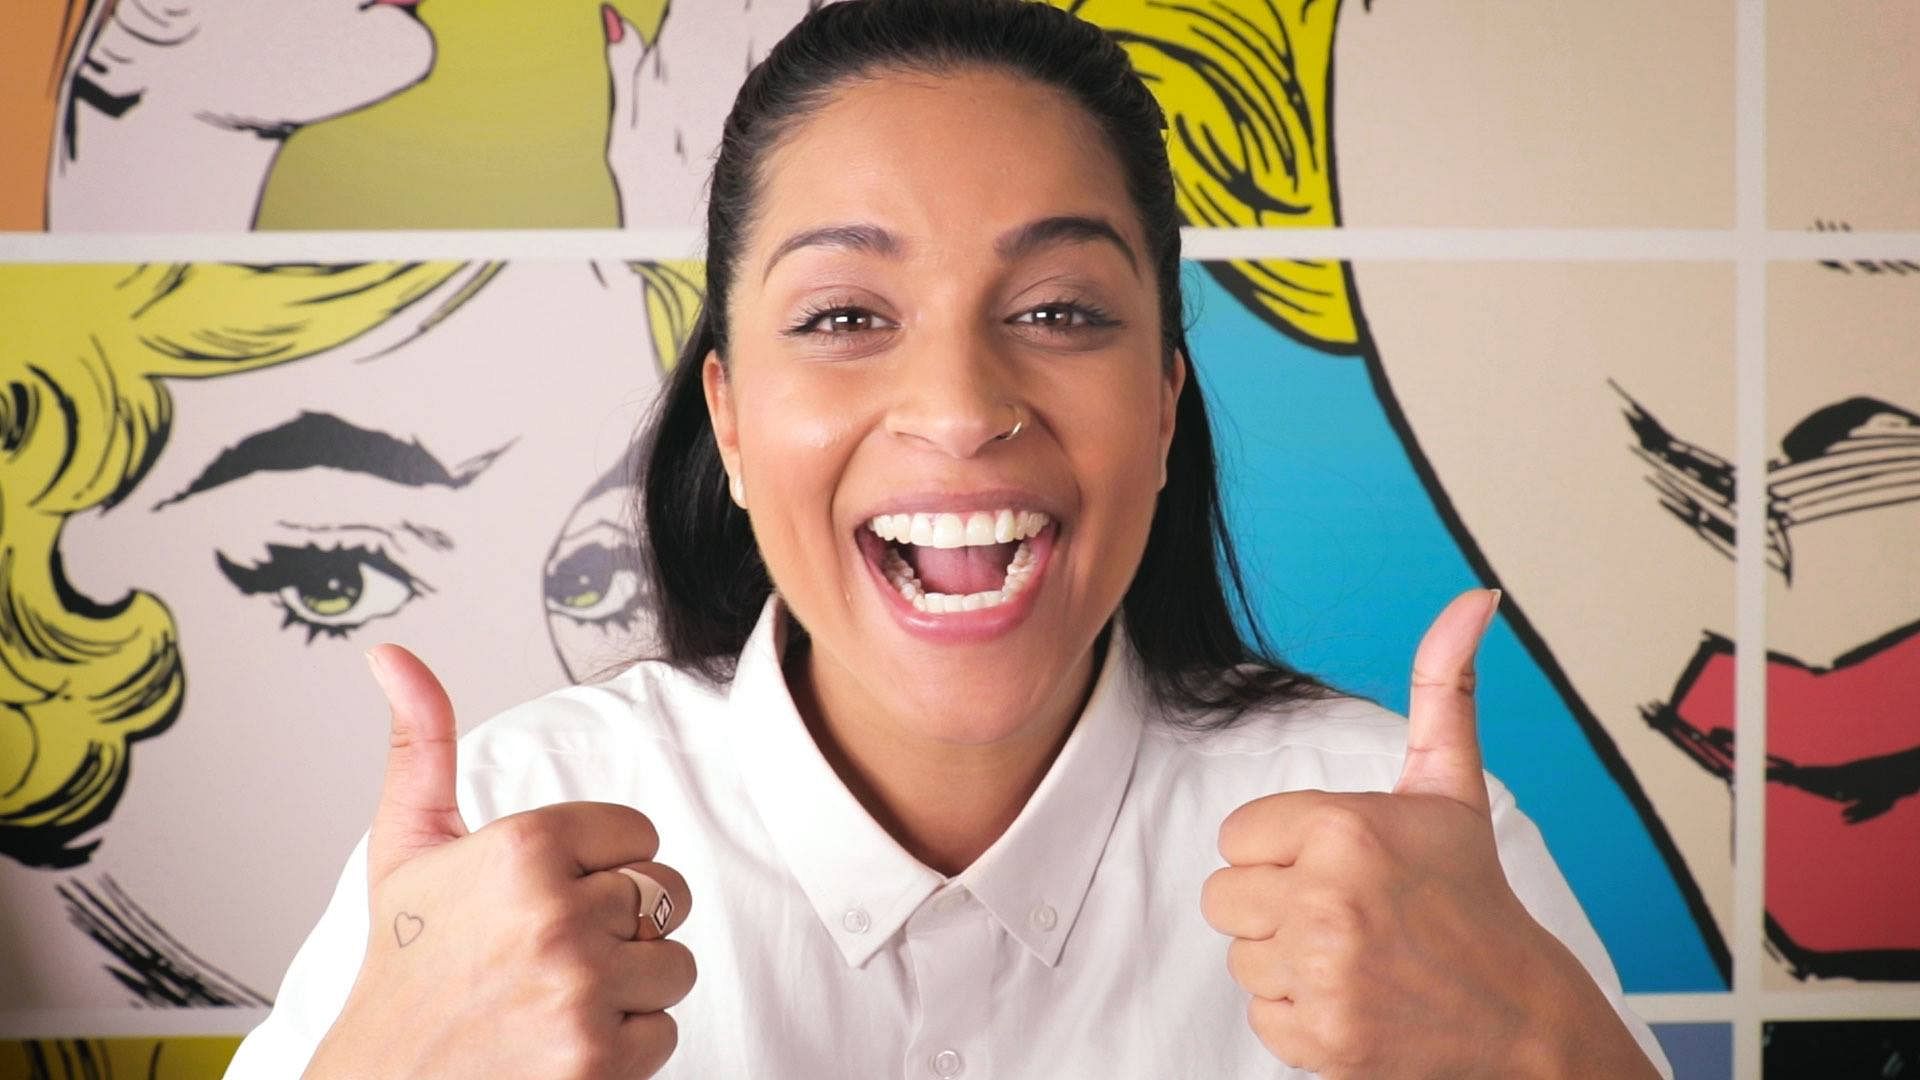 YouTube star Lilly Singh on coming out as bisexual. 